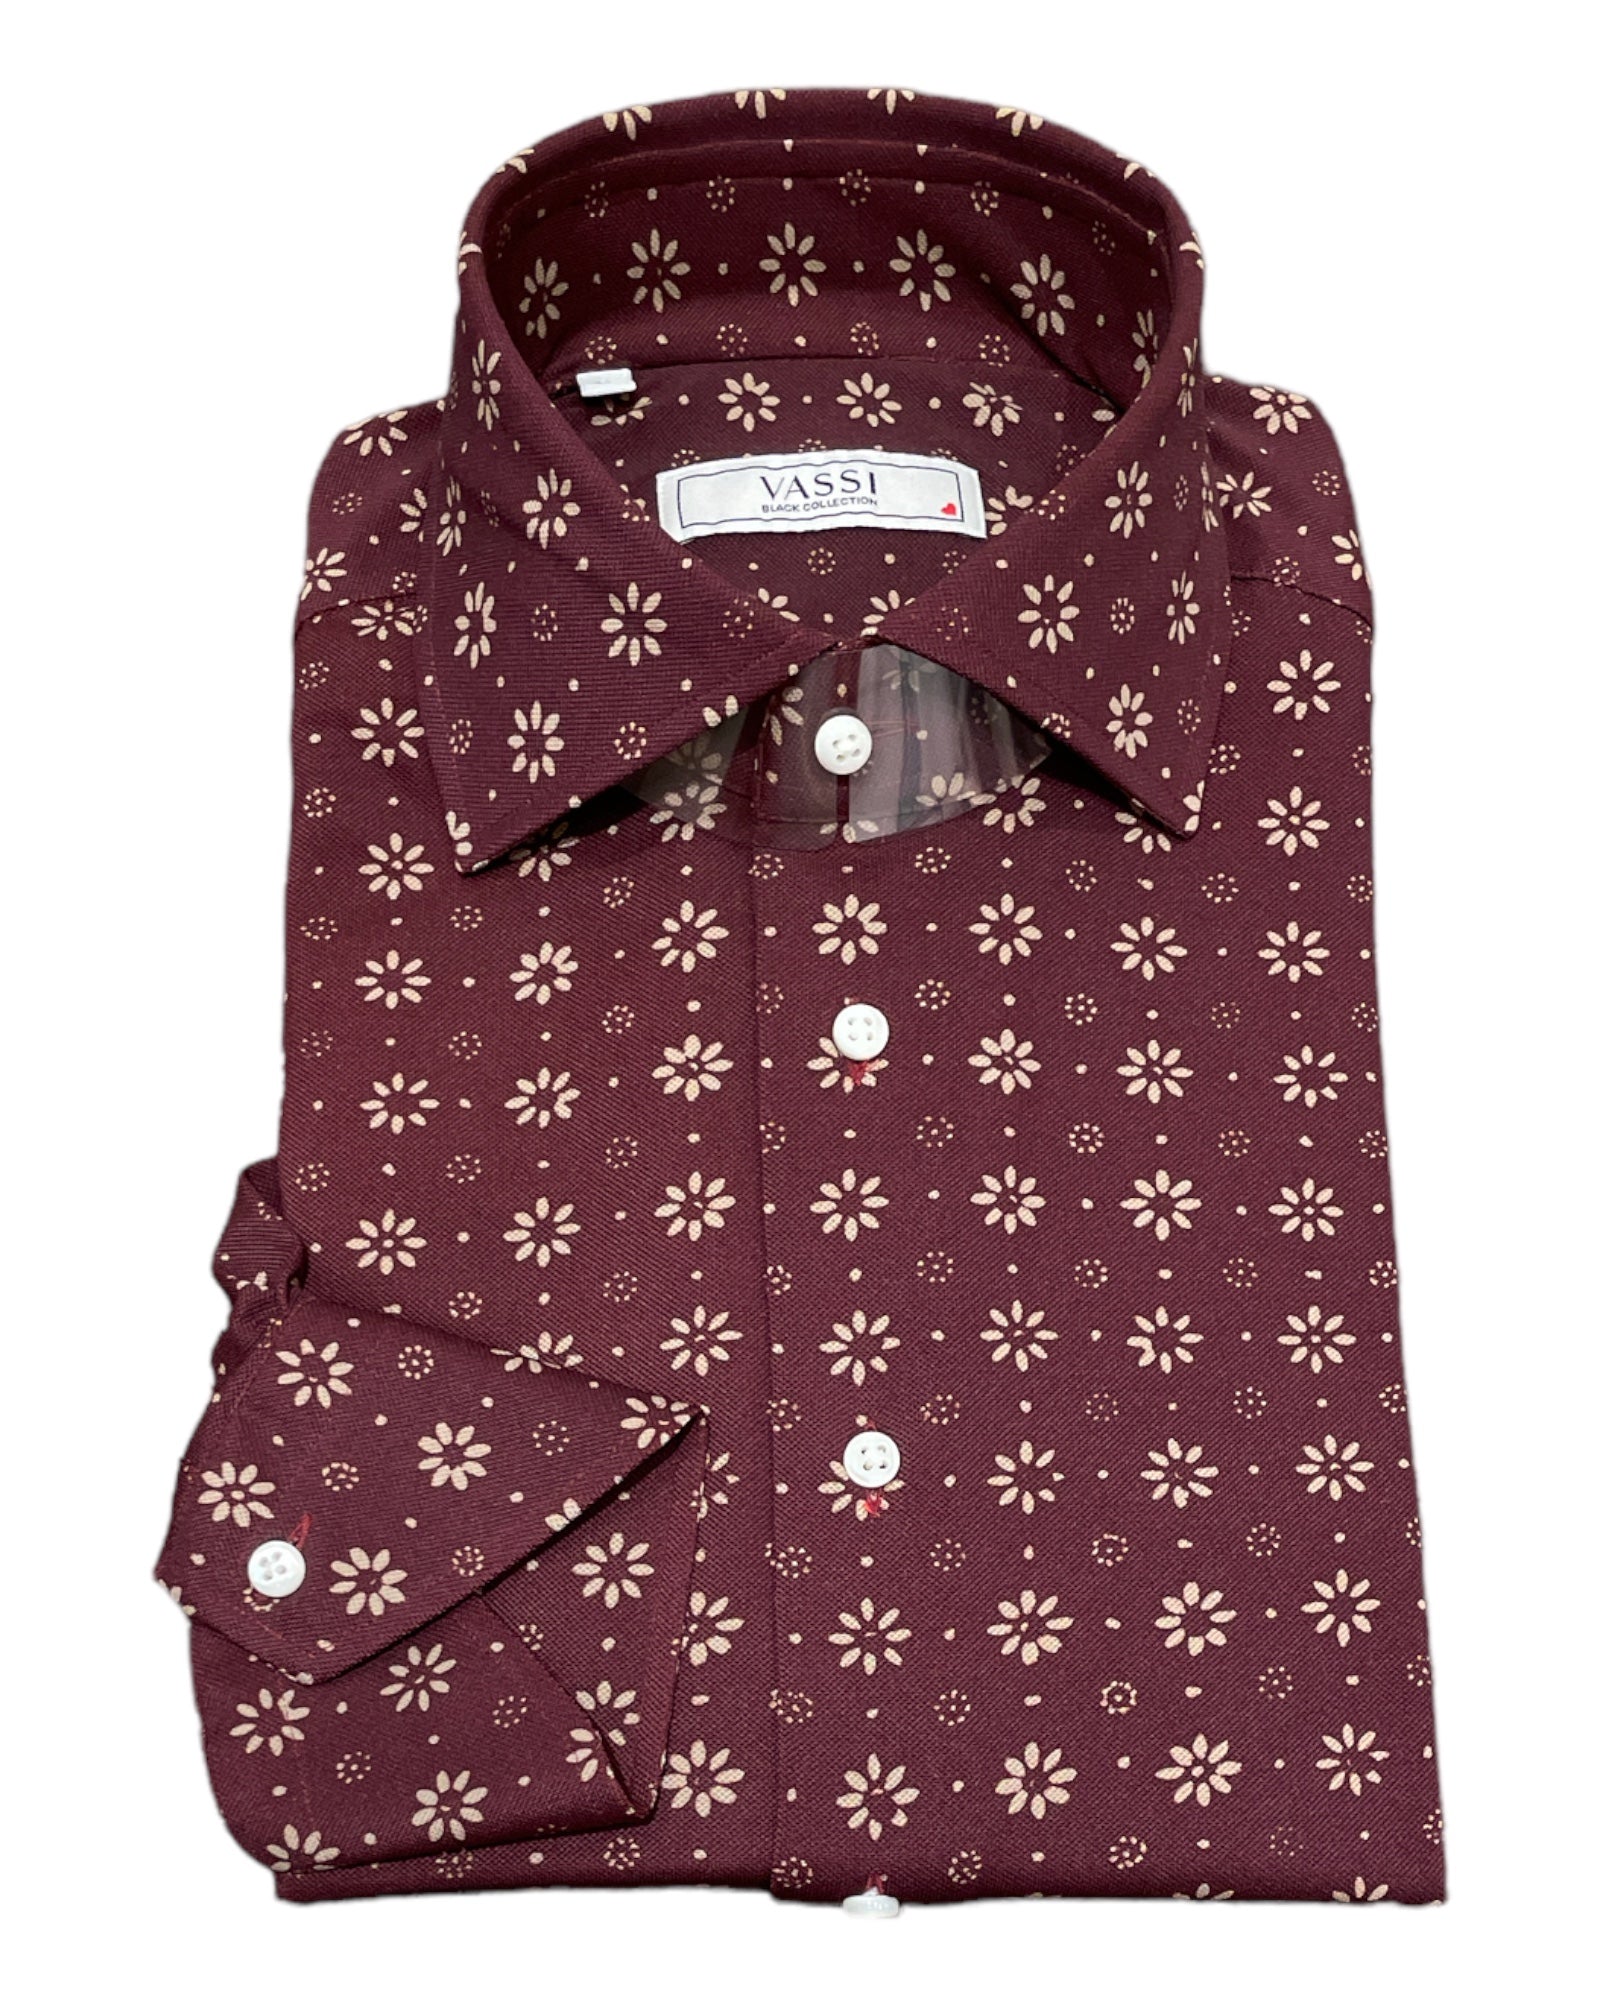 Floral Cotton Sport Shirt - Burgundy with Taupe Daisies SPORT SHIRTSM